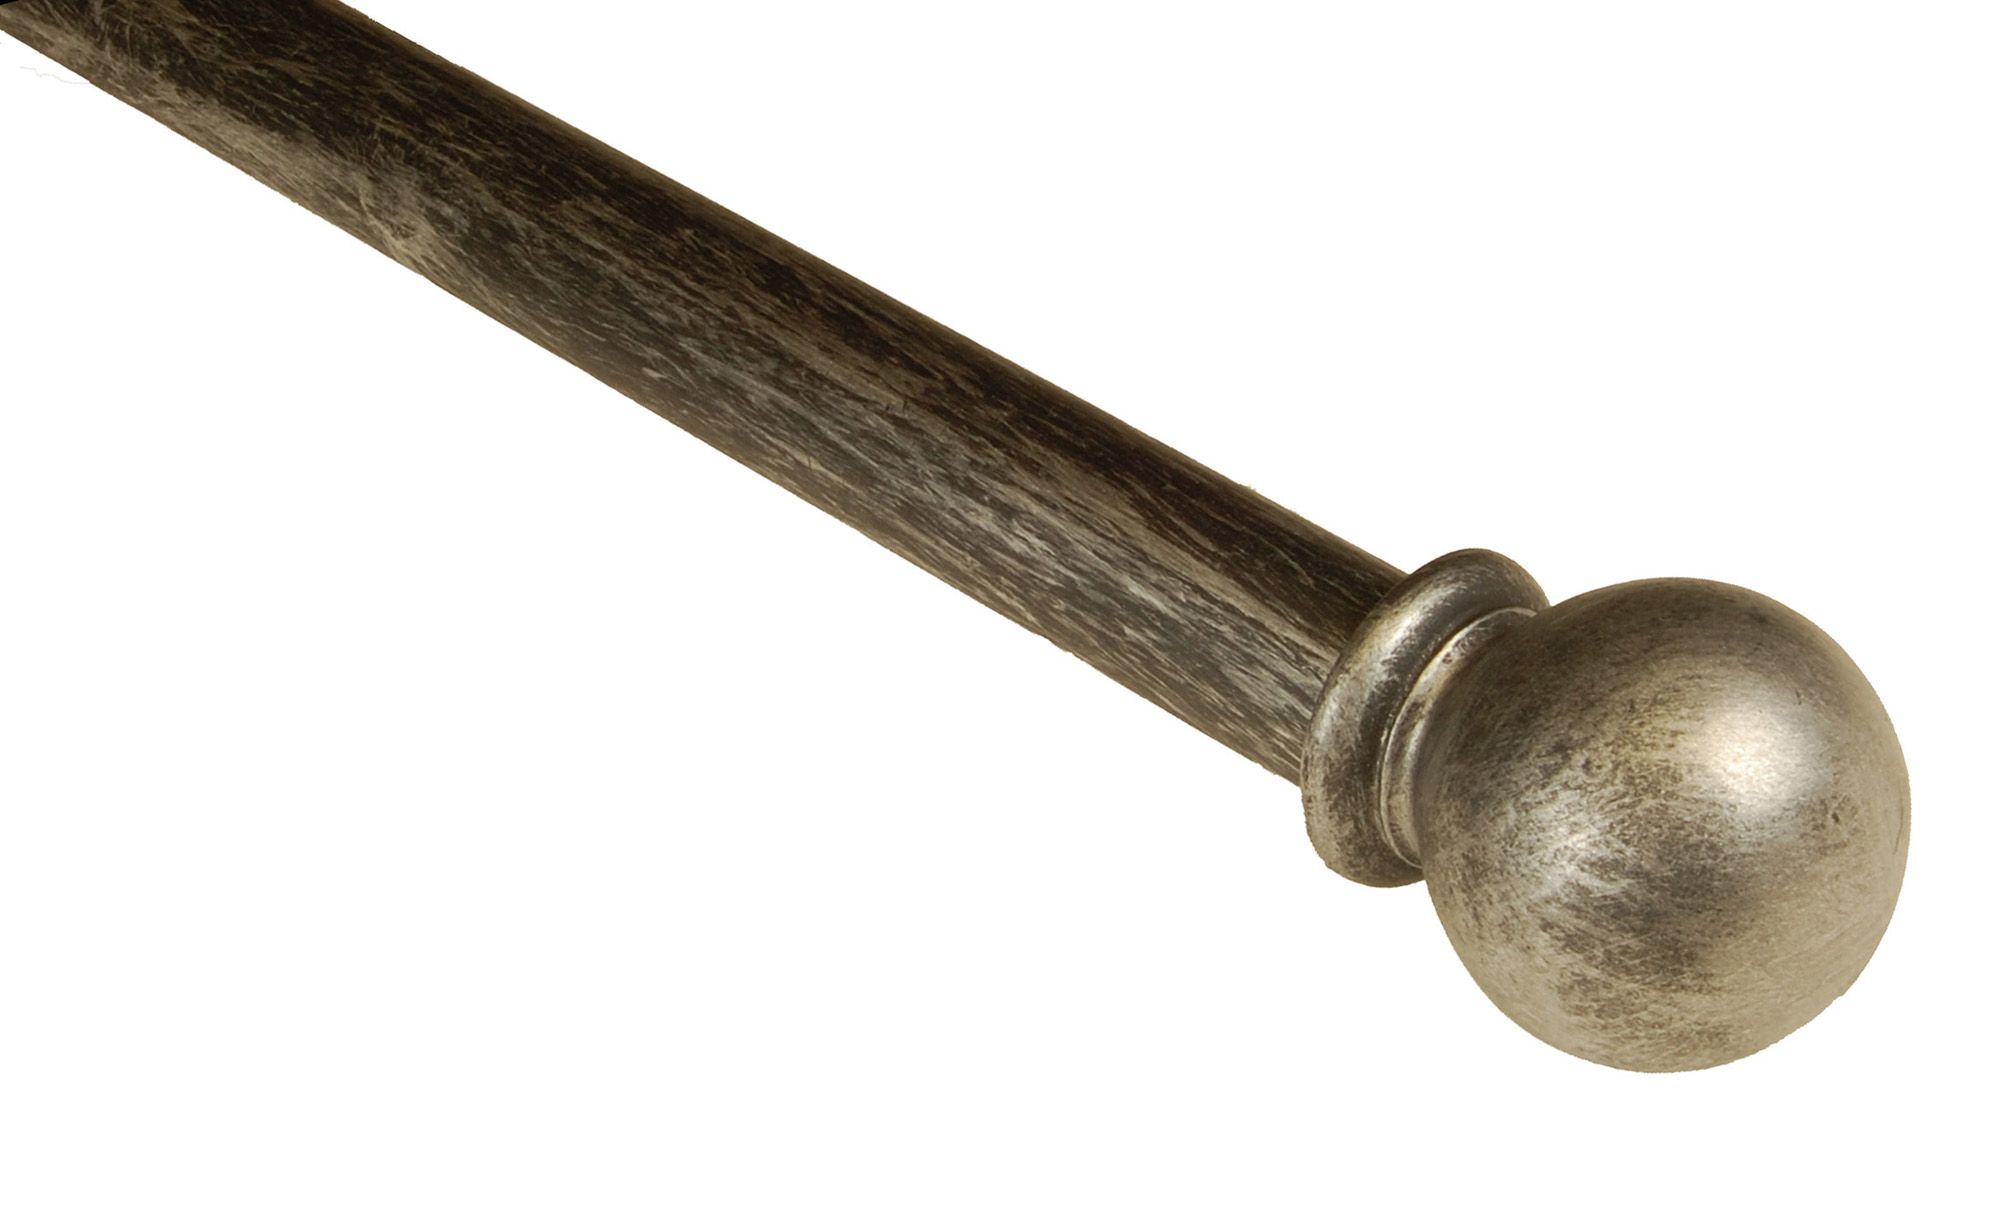 BCL Classic Ball Curtain Rod, Antique Silver Finish, 48-inch to 86-inch, 1.25-inch Diameter Pole